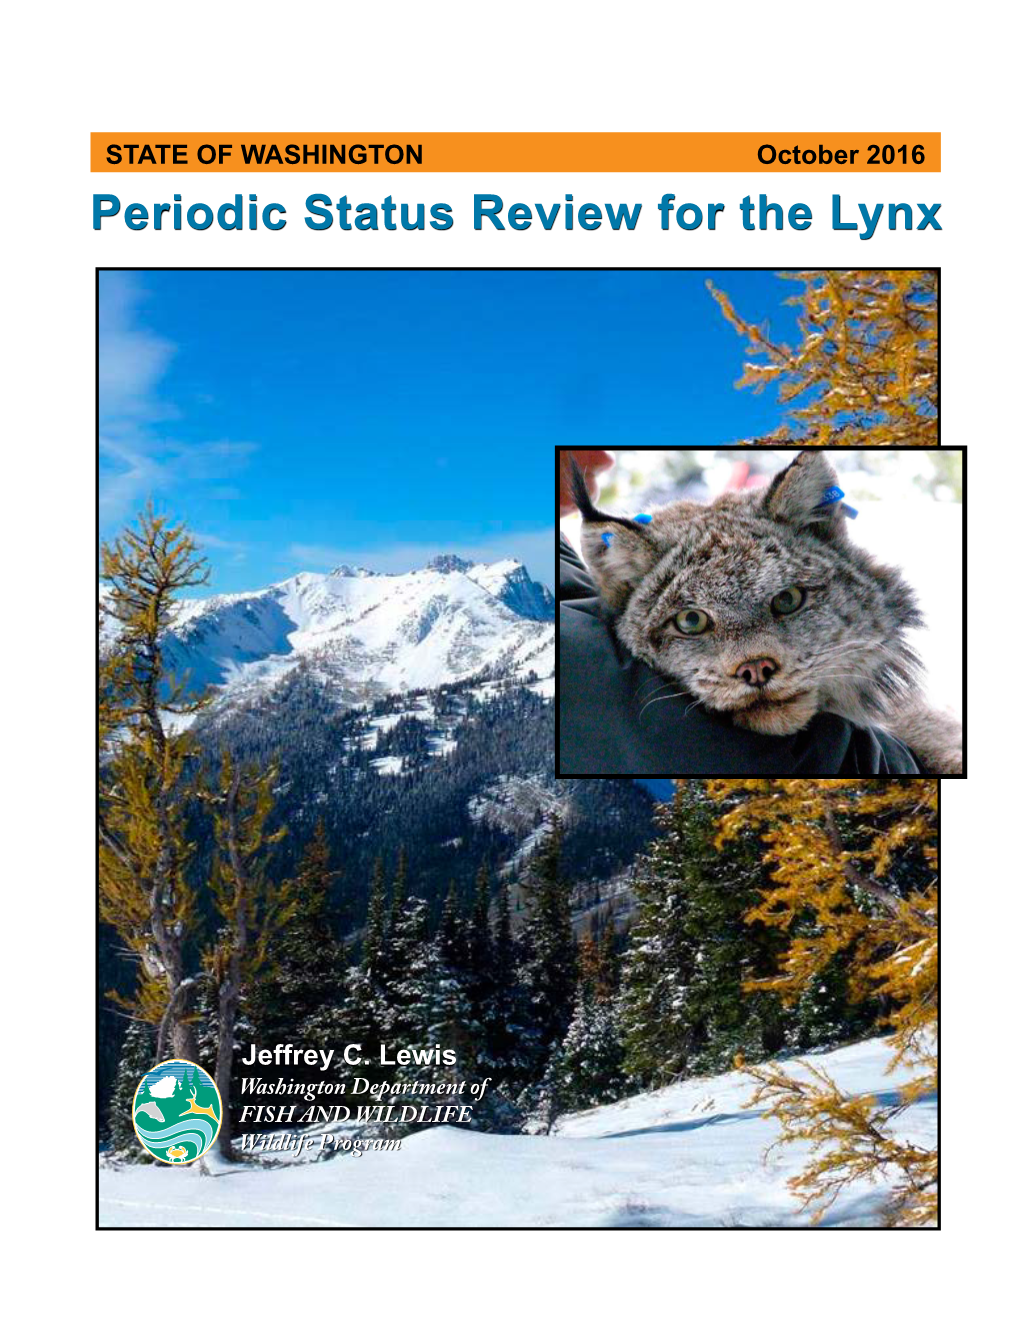 Periodic Status Review for the Lynx in Washington